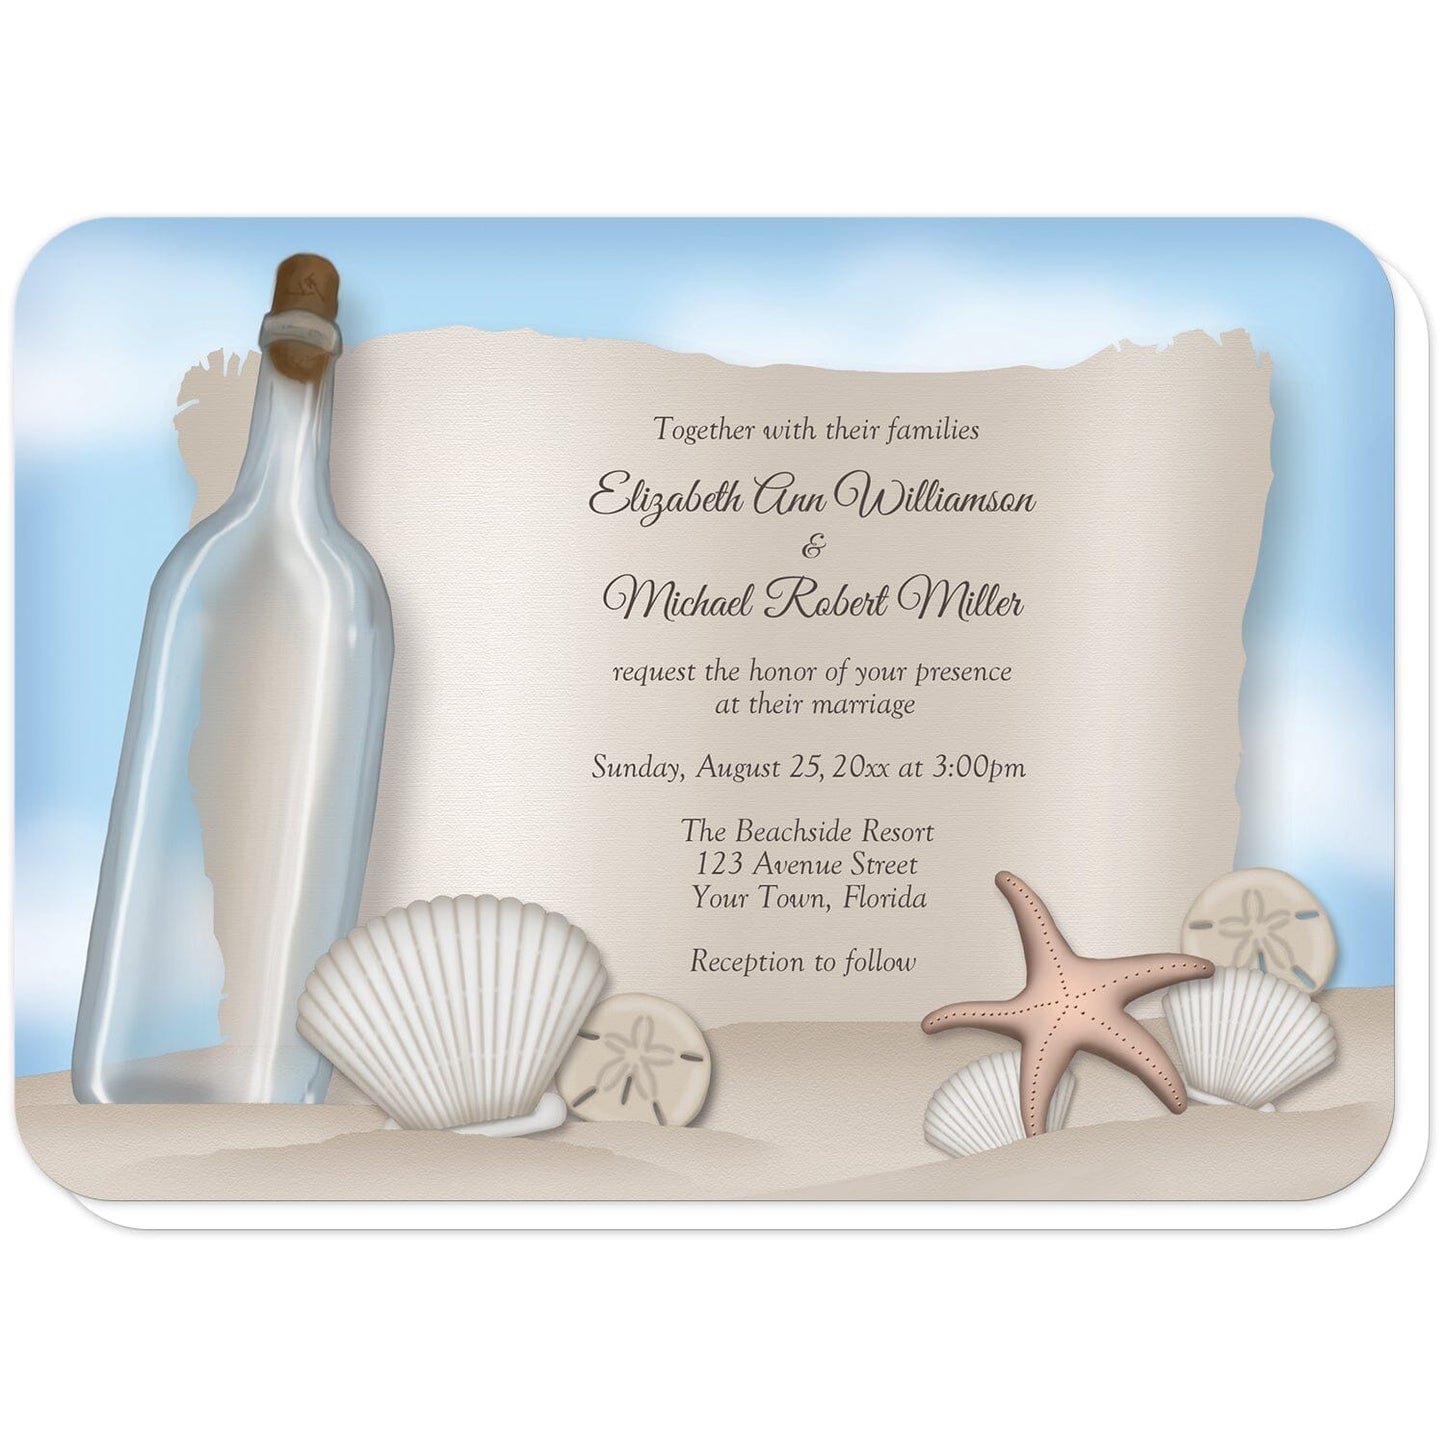 Message from a Bottle Beach Wedding Invitations (with rounded corners) at Artistically Invited. Message from a bottle beach wedding invitations with an "on the beach" and "message from a bottle" theme. They're designed with an illustrated empty glass bottle, a paper message area, beige sand, a blue sky, and assorted seashells. Your personalized marriage celebration details are custom printed in brown over the paper illustration.